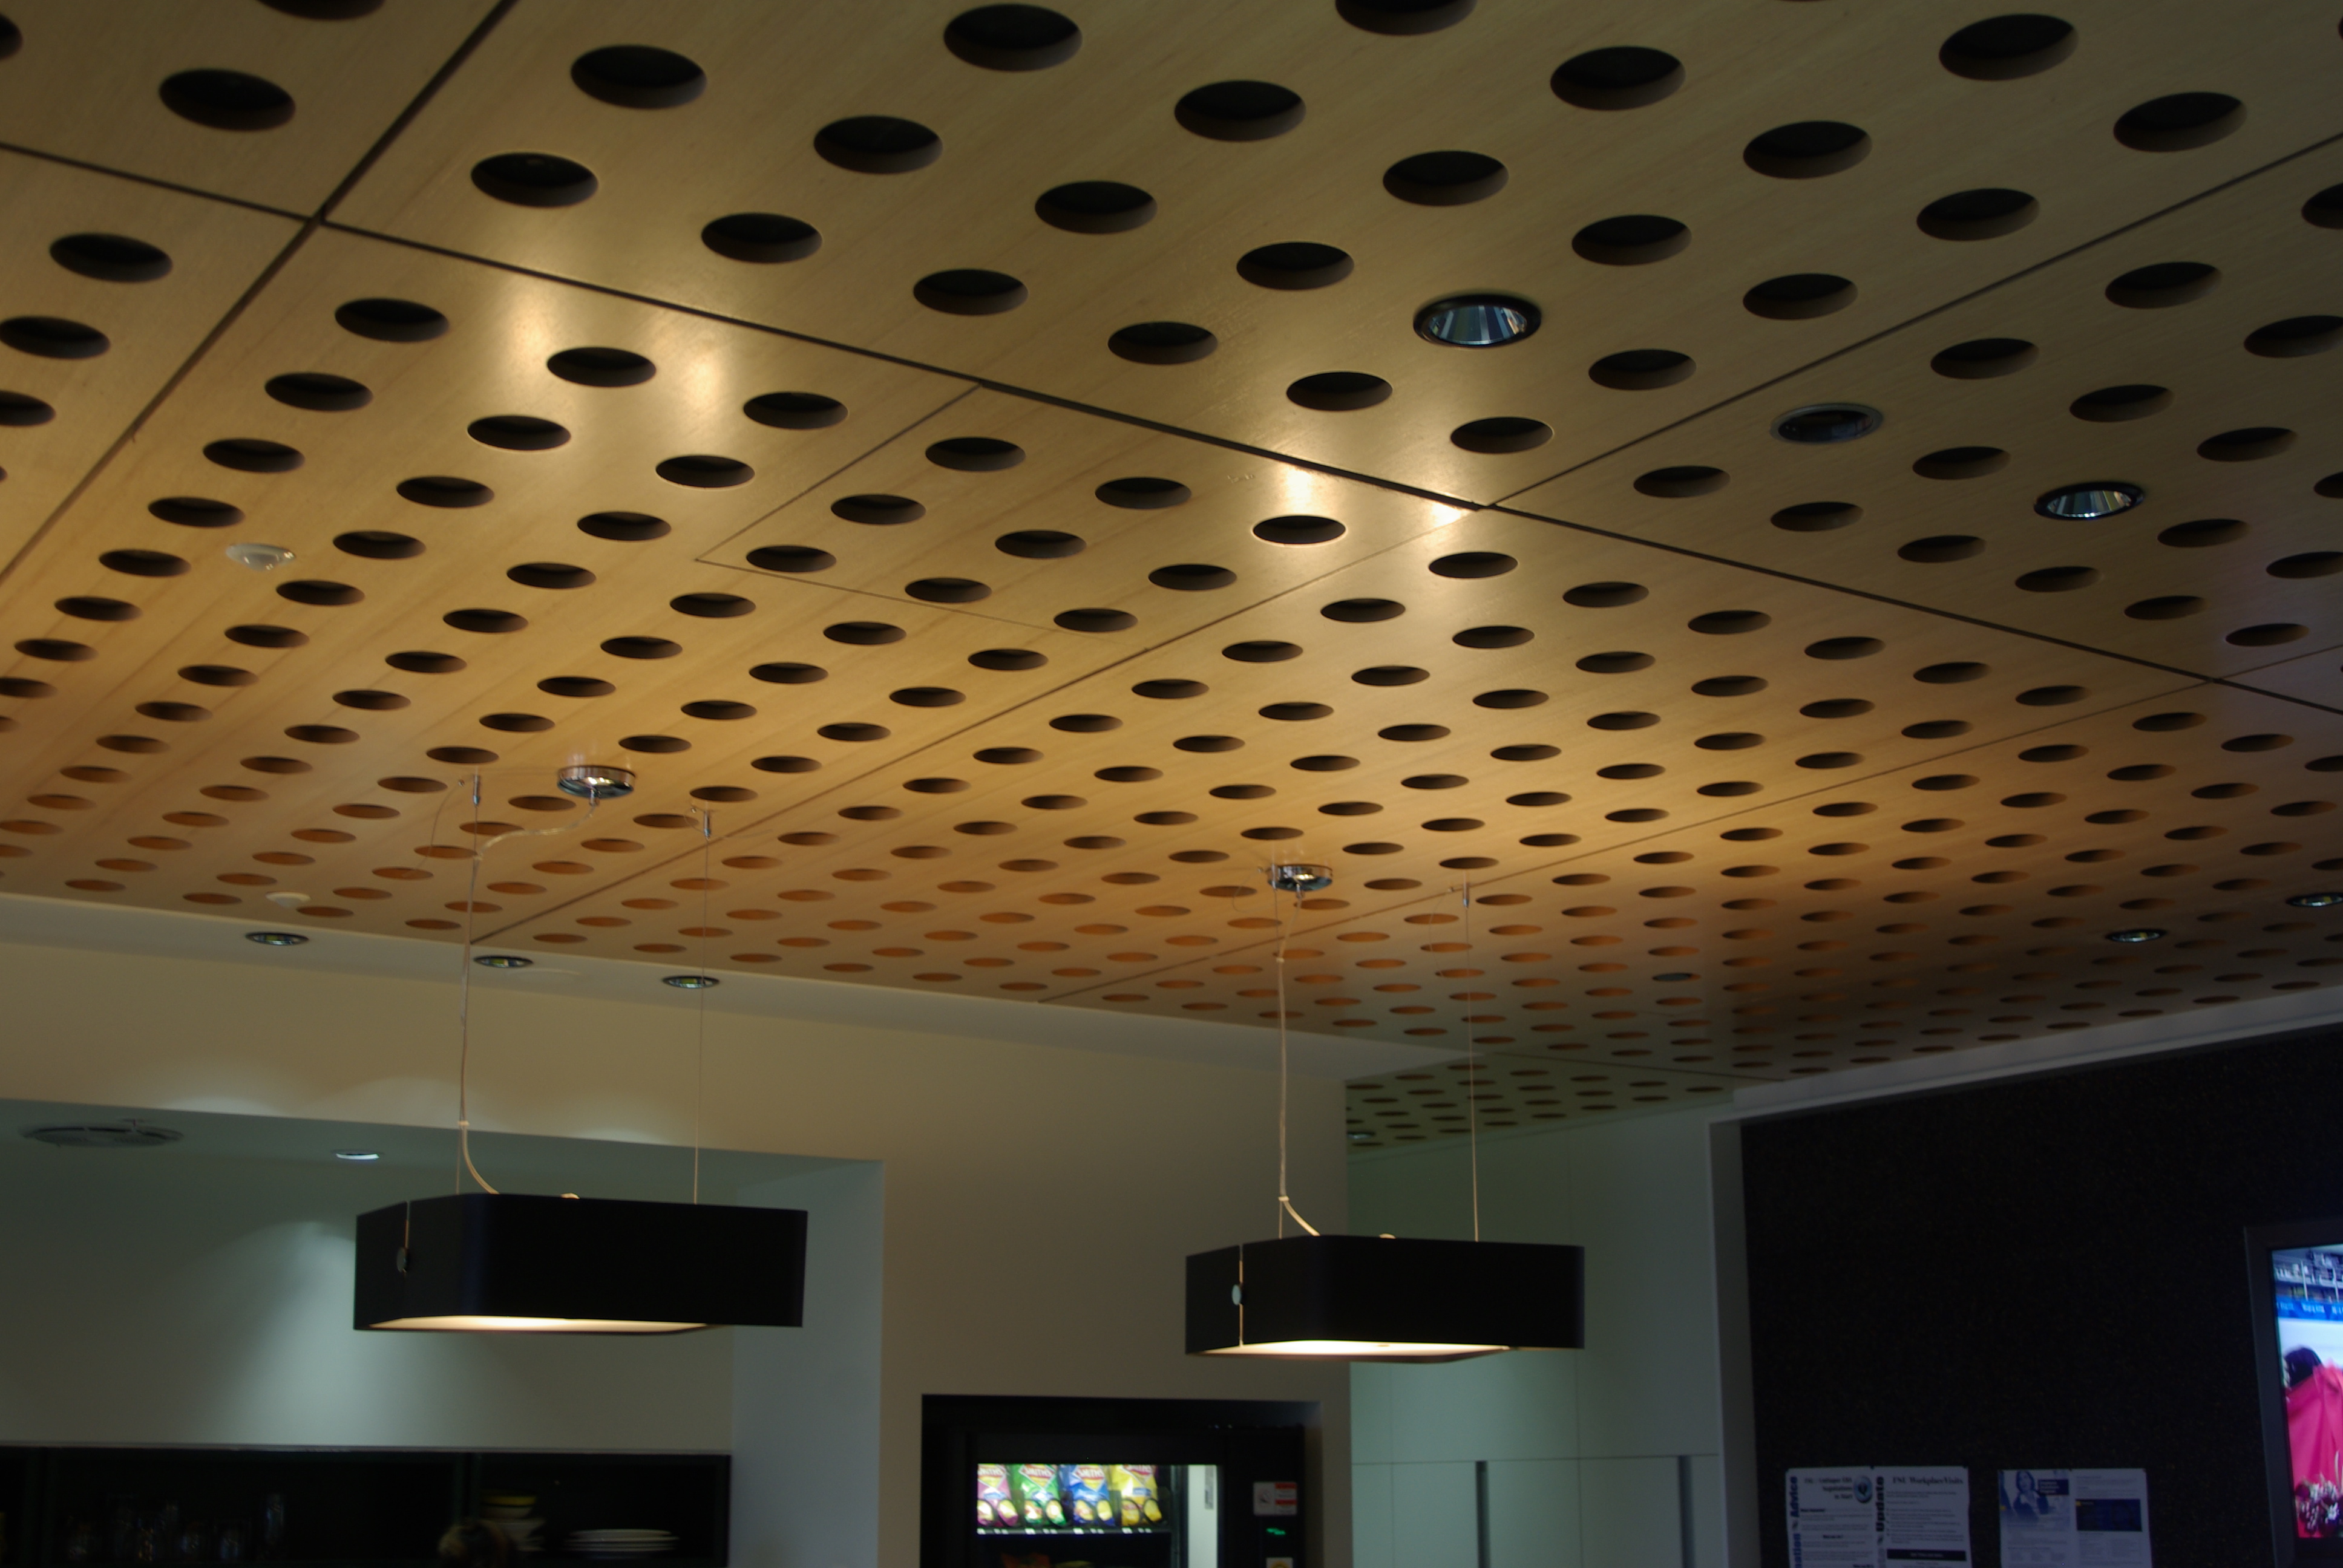 How Timber Wood Panels Present an Effective Acoustic Solution